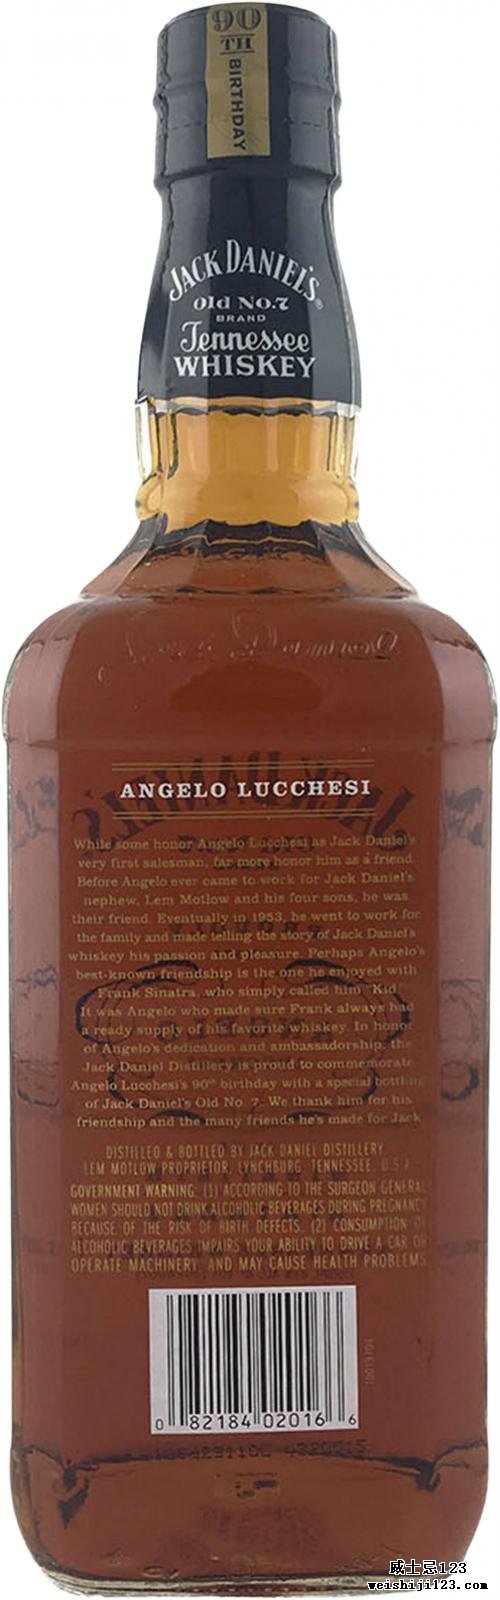 Jack Daniel's Old No. 7 - Angelo Lucchesi